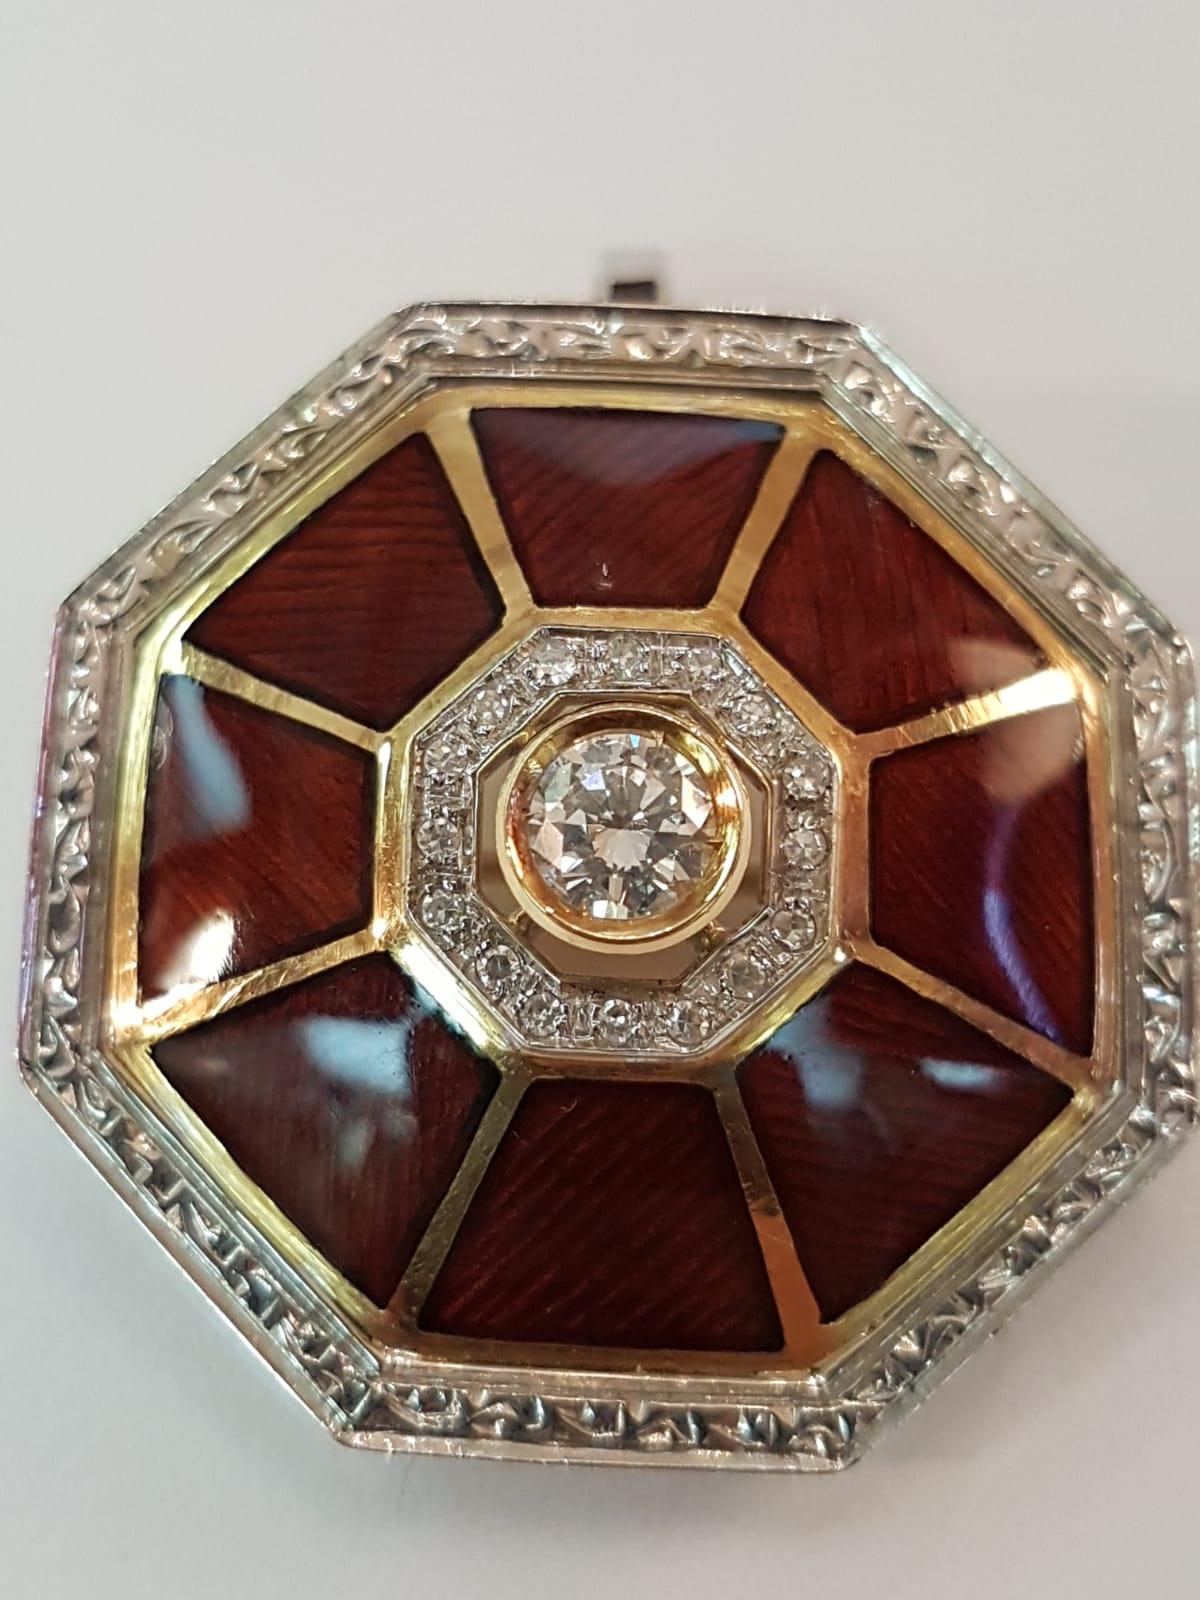 This piece of jewelry is a beautiful example of the Art of Enameling. It brings tradition of enameling into the late 20th century, making it a precious work of wearable art for today. Handcrafted, it features 0,70ct diamonds on white gold and yellow